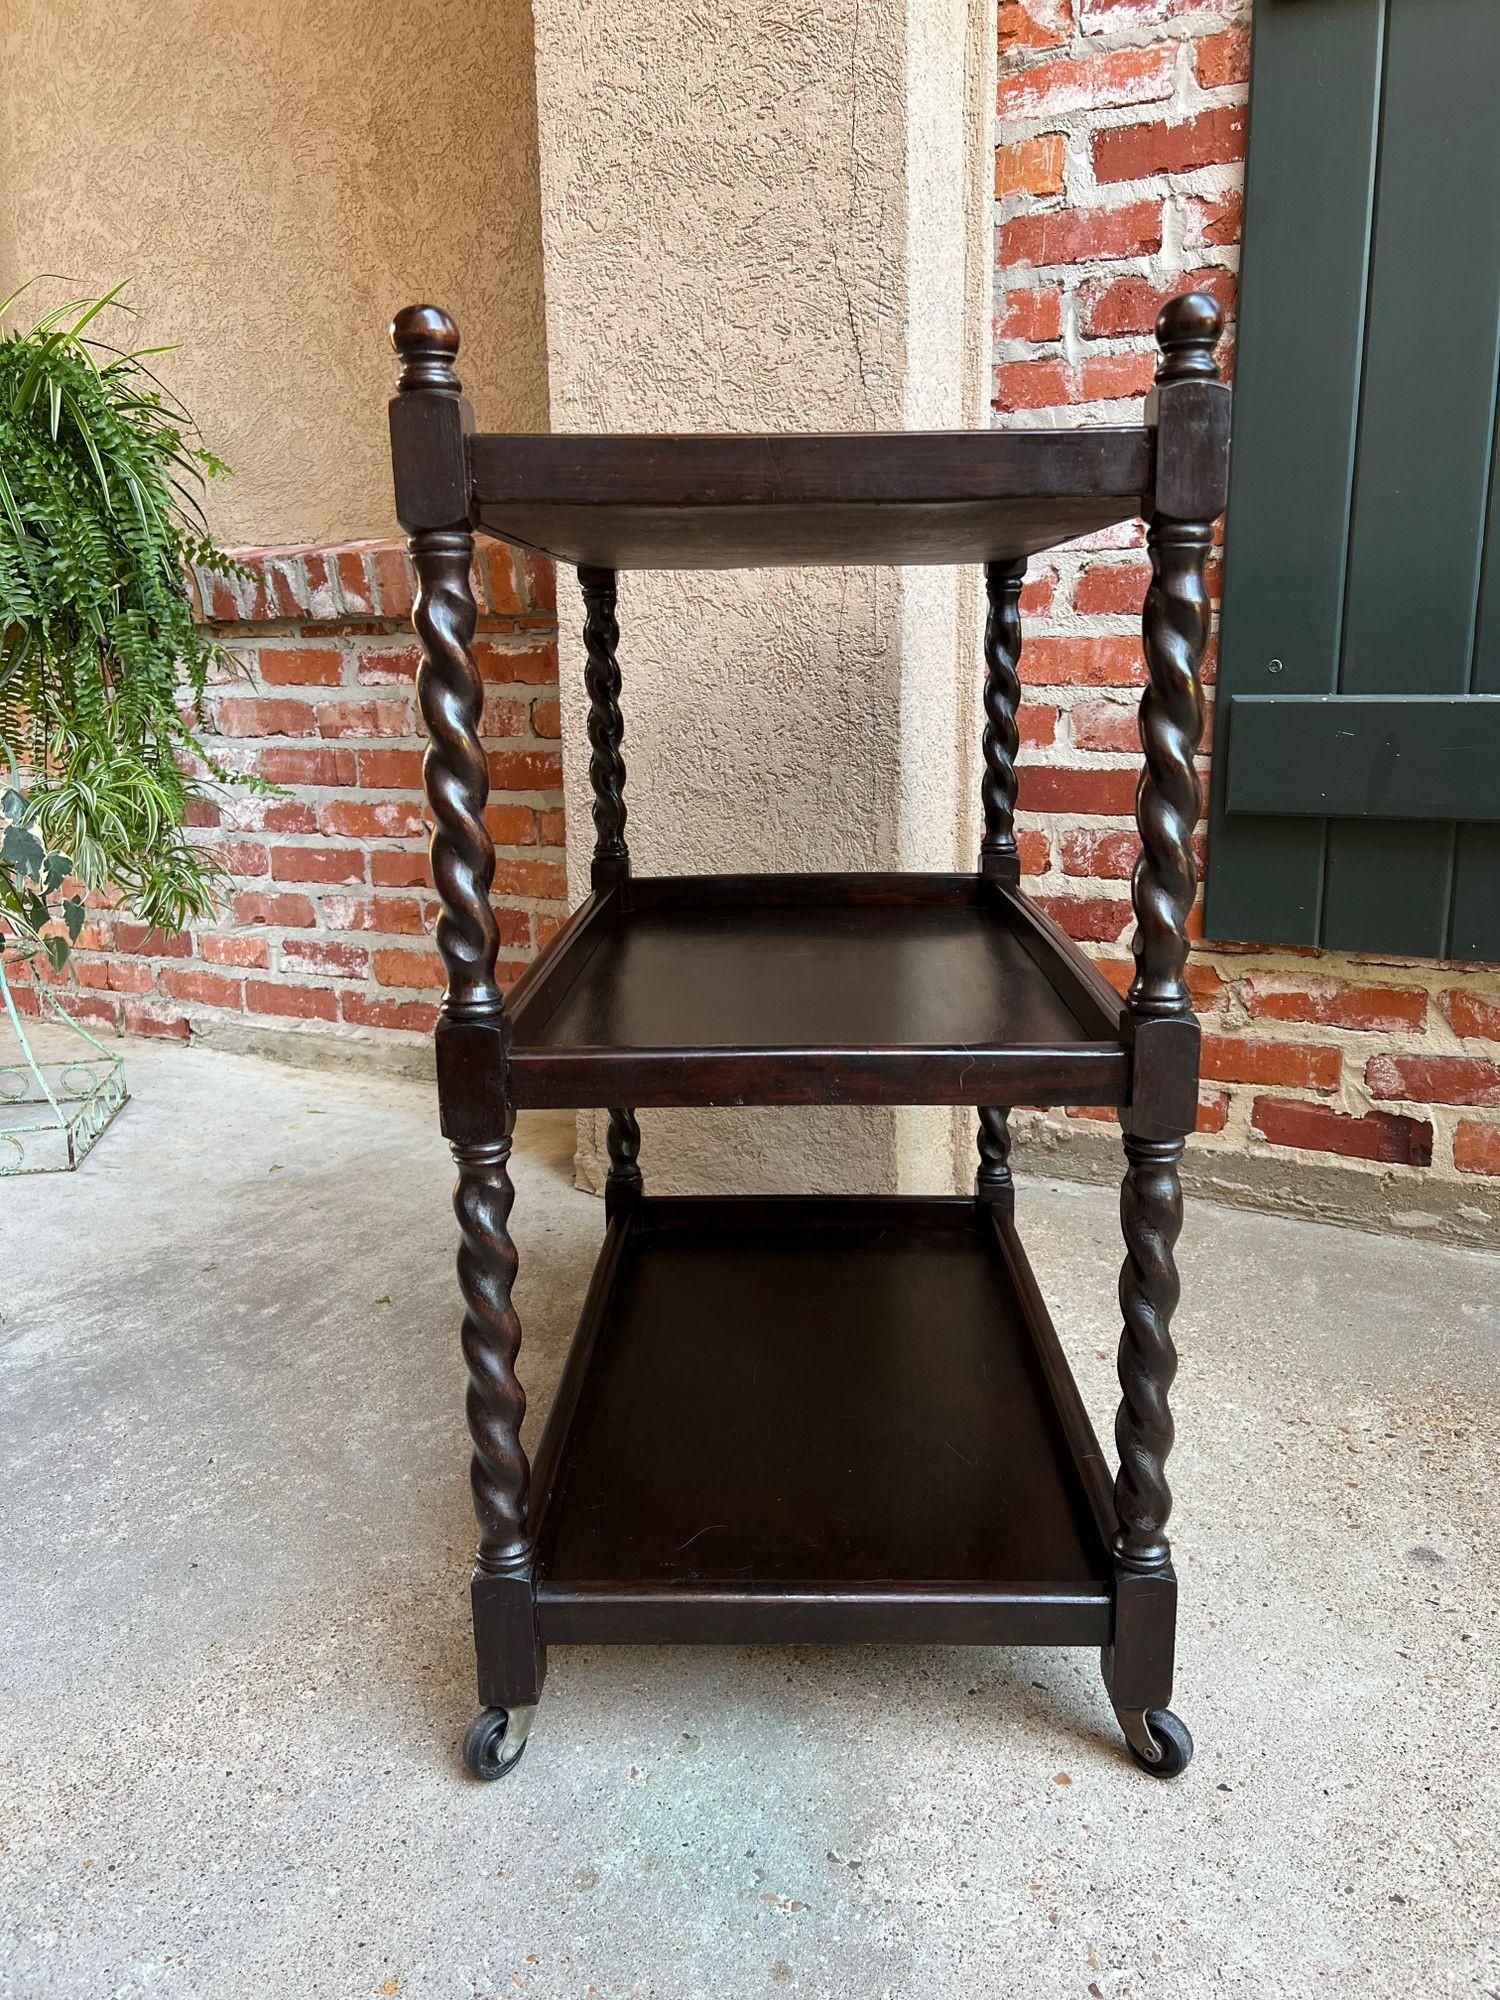 Antique English oak tea trolley drinks wine serving cart barley twist dumbwaiter.
 
Direct from England, a beautiful antique English oak tea trolley or “dumbwaiter” serving cart. Excellent for entertaining and great for use as a side table or sofa